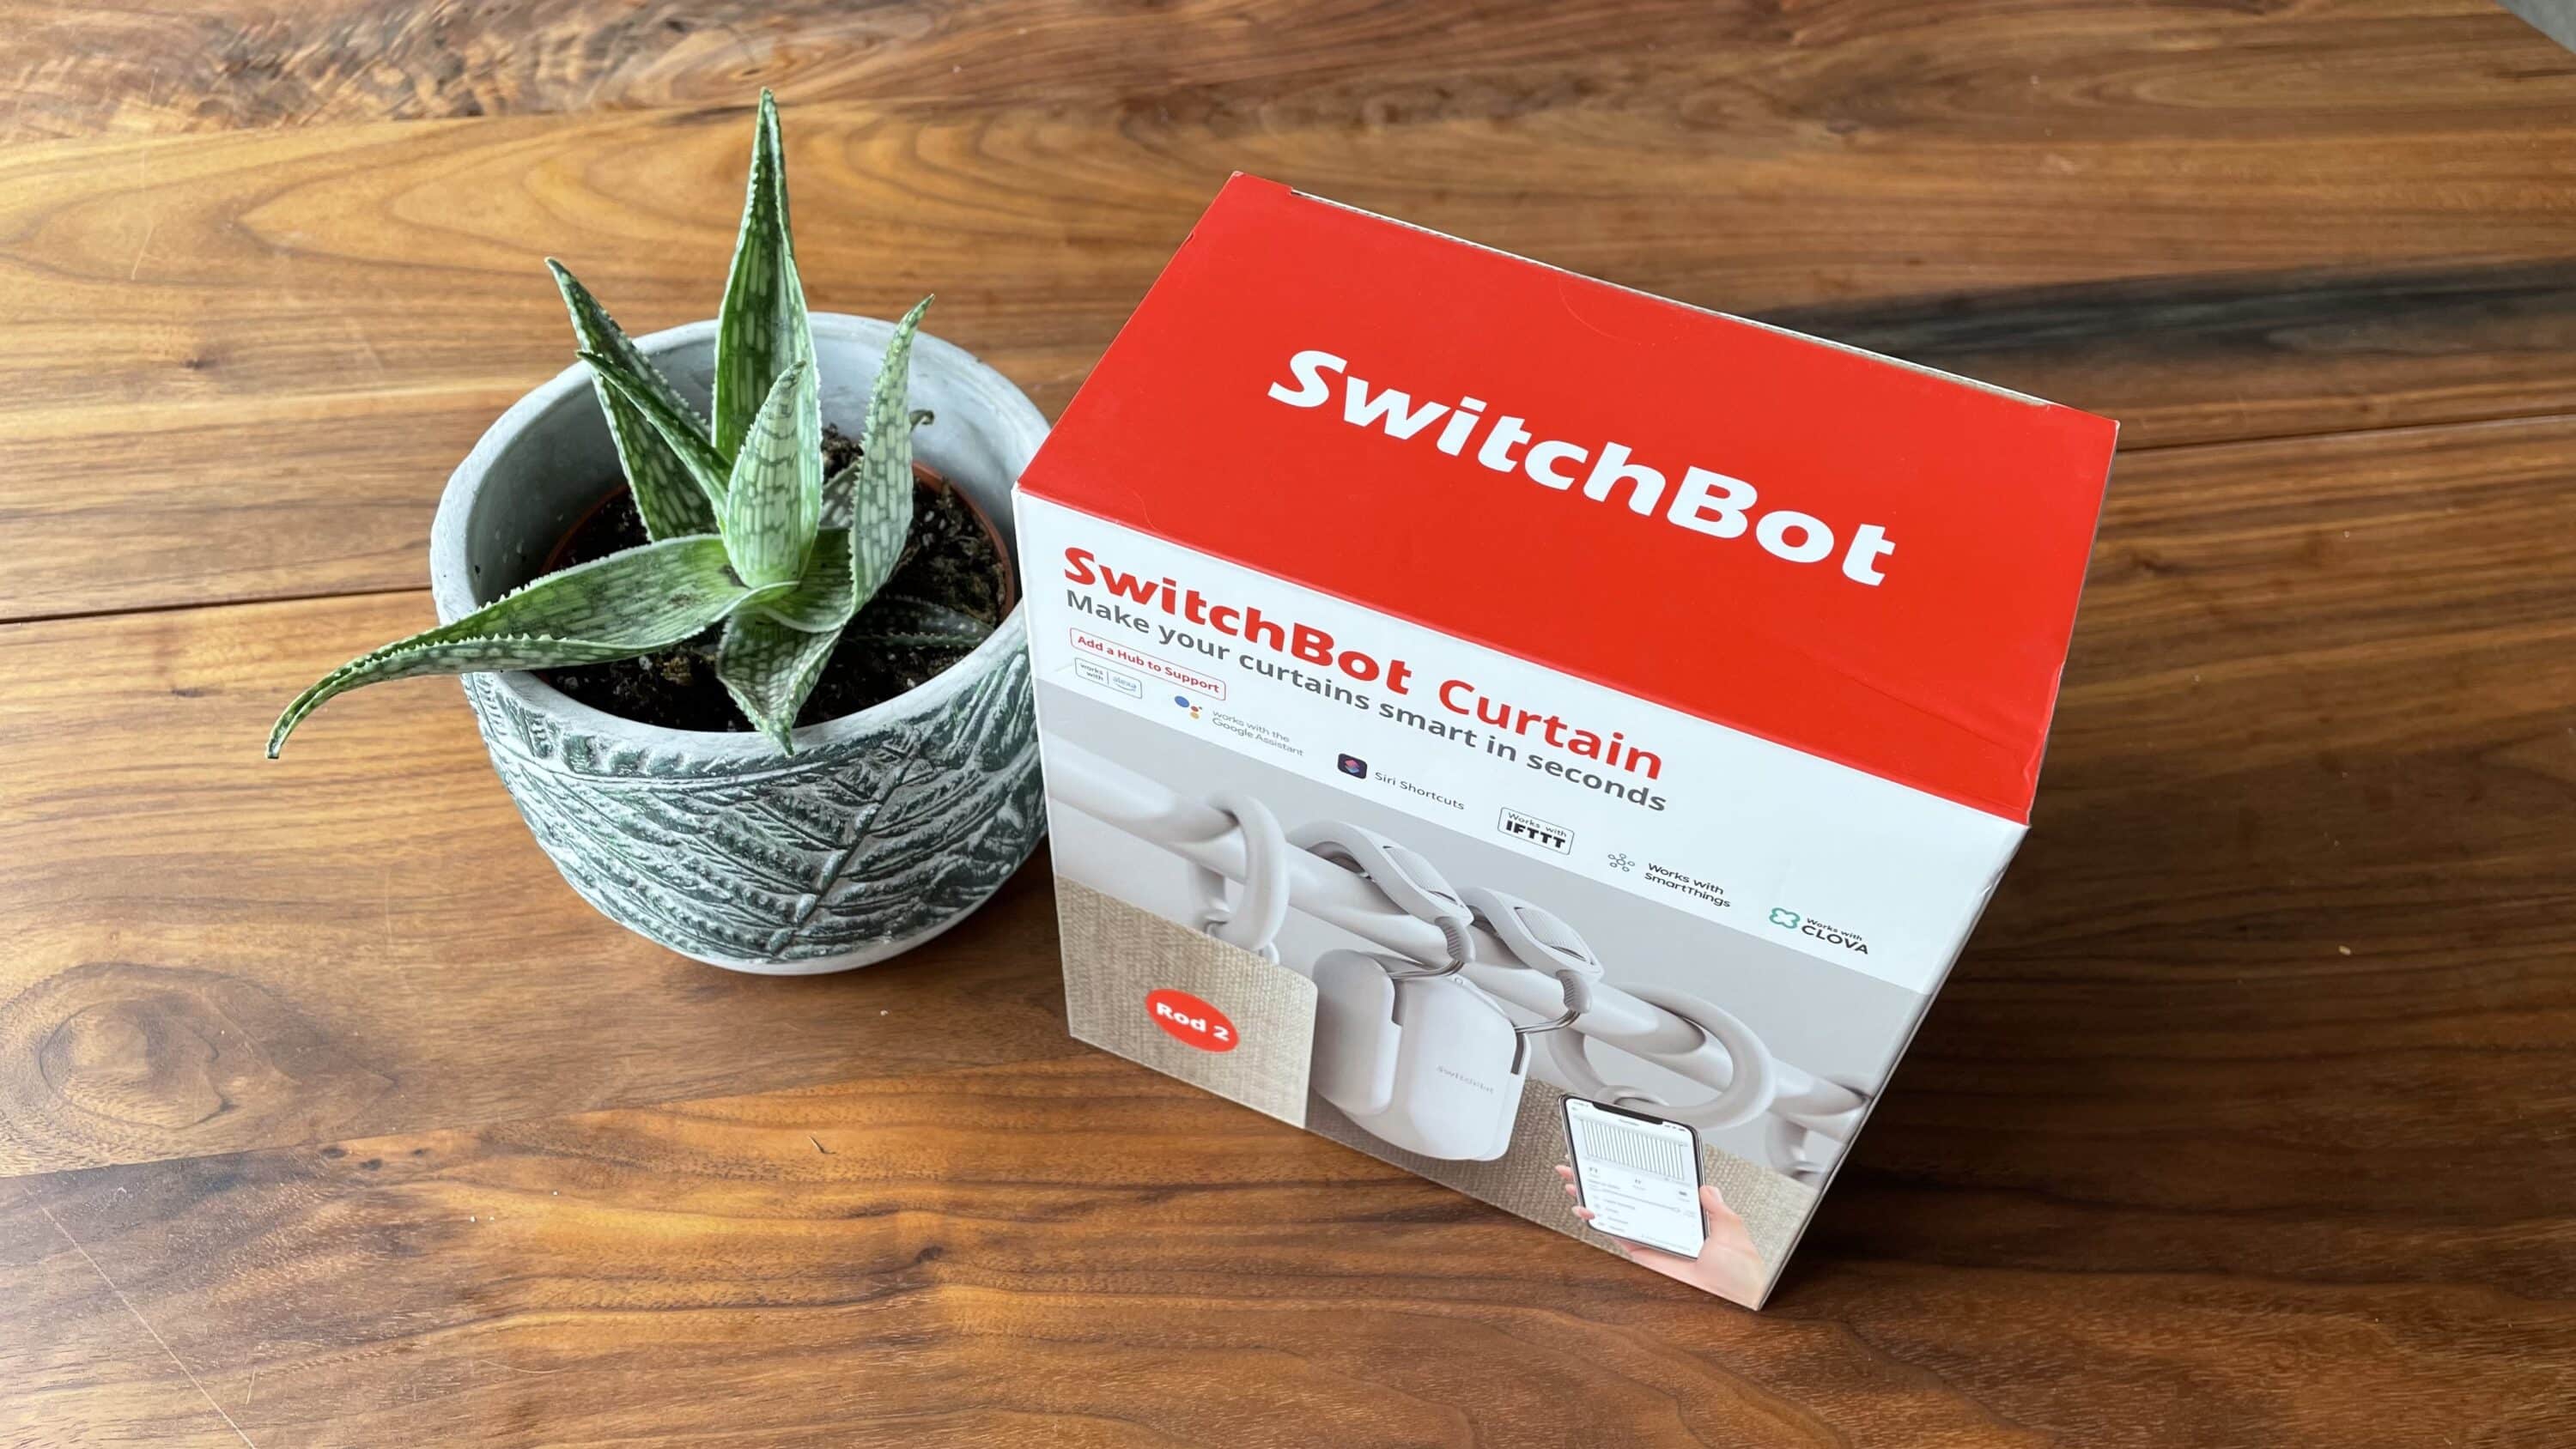 SwitchBot Curtain Robot Version 2 review – A great product made even  better! - The Gadgeteer